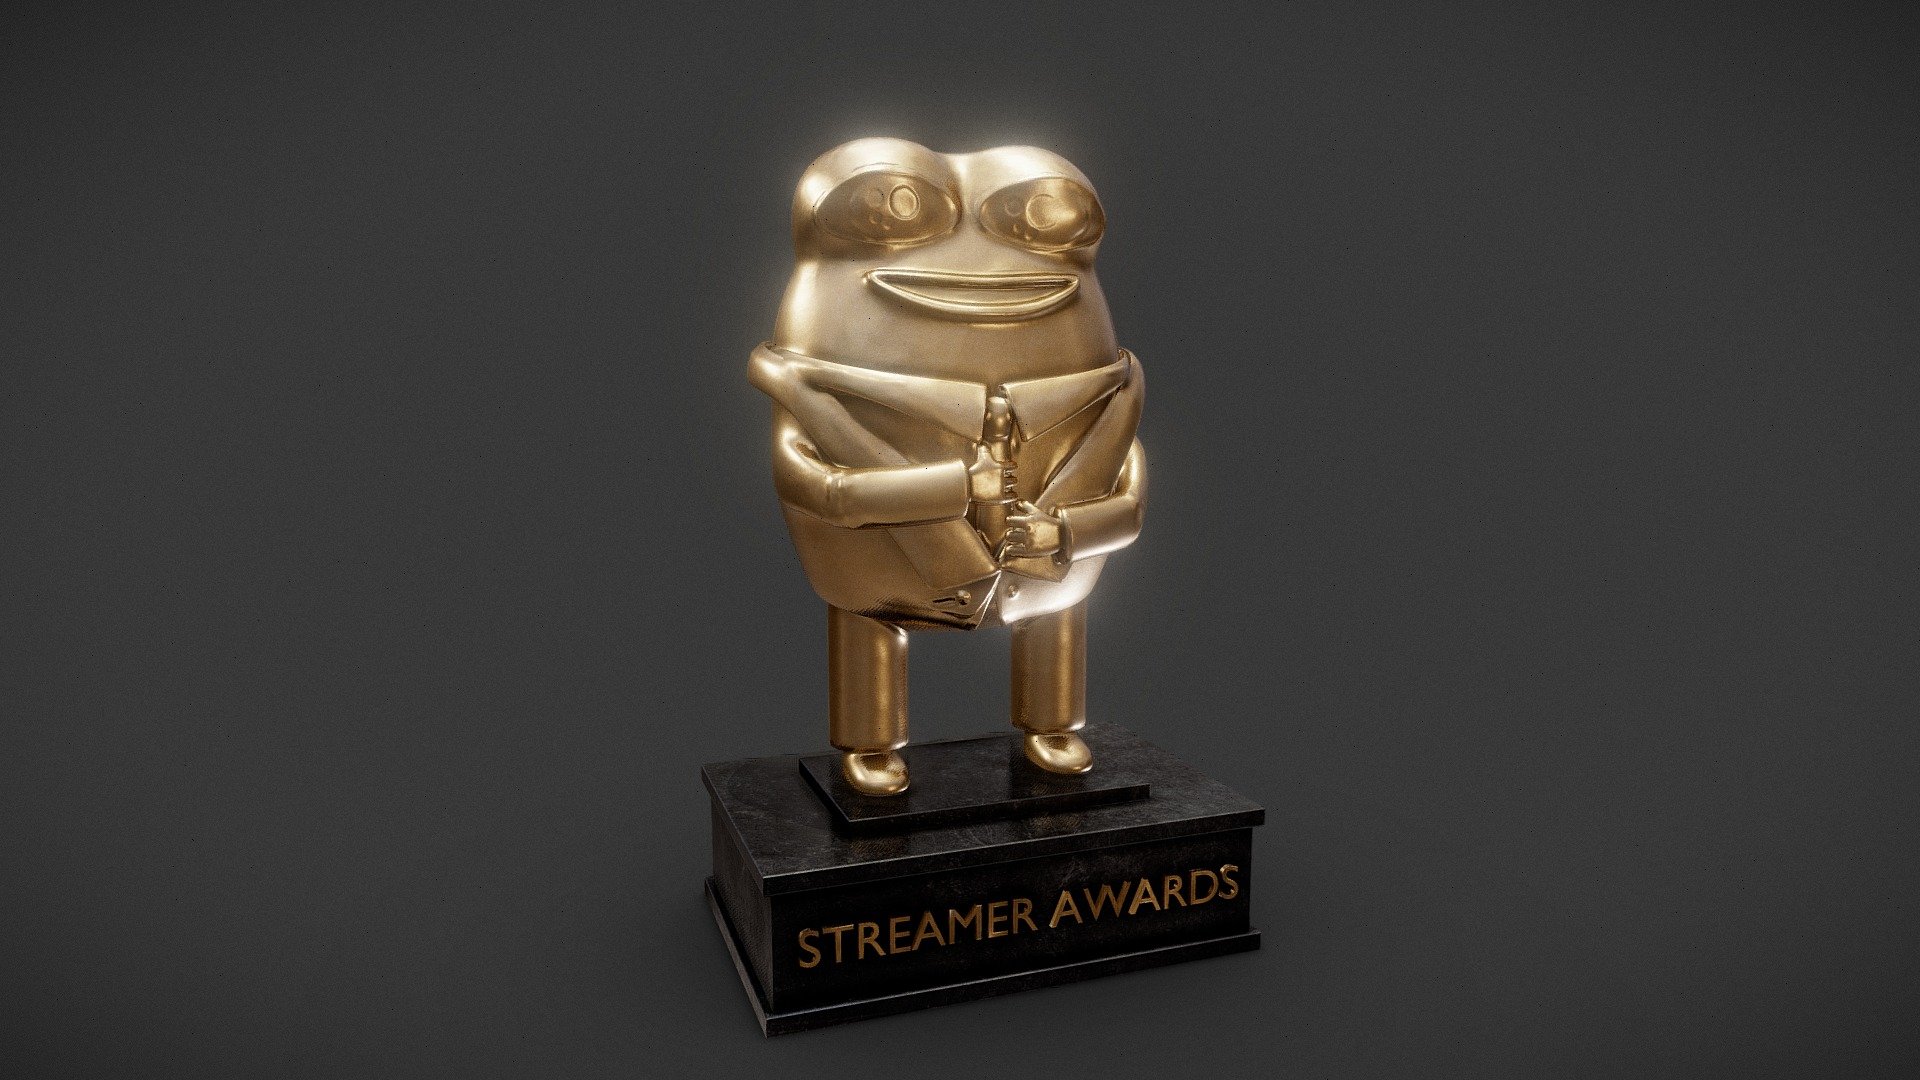 Streamer Award Trophy awarded to live streamers. An annual event

Poly modeled in blender with SubD, then sculpted detail and baked high poly to low poly

4k, 1 material, textured in susbtance painter

Created for a commission - Streamer Awards Trophy - 3D model by LegendsVR (@legendsvrc) 3d model